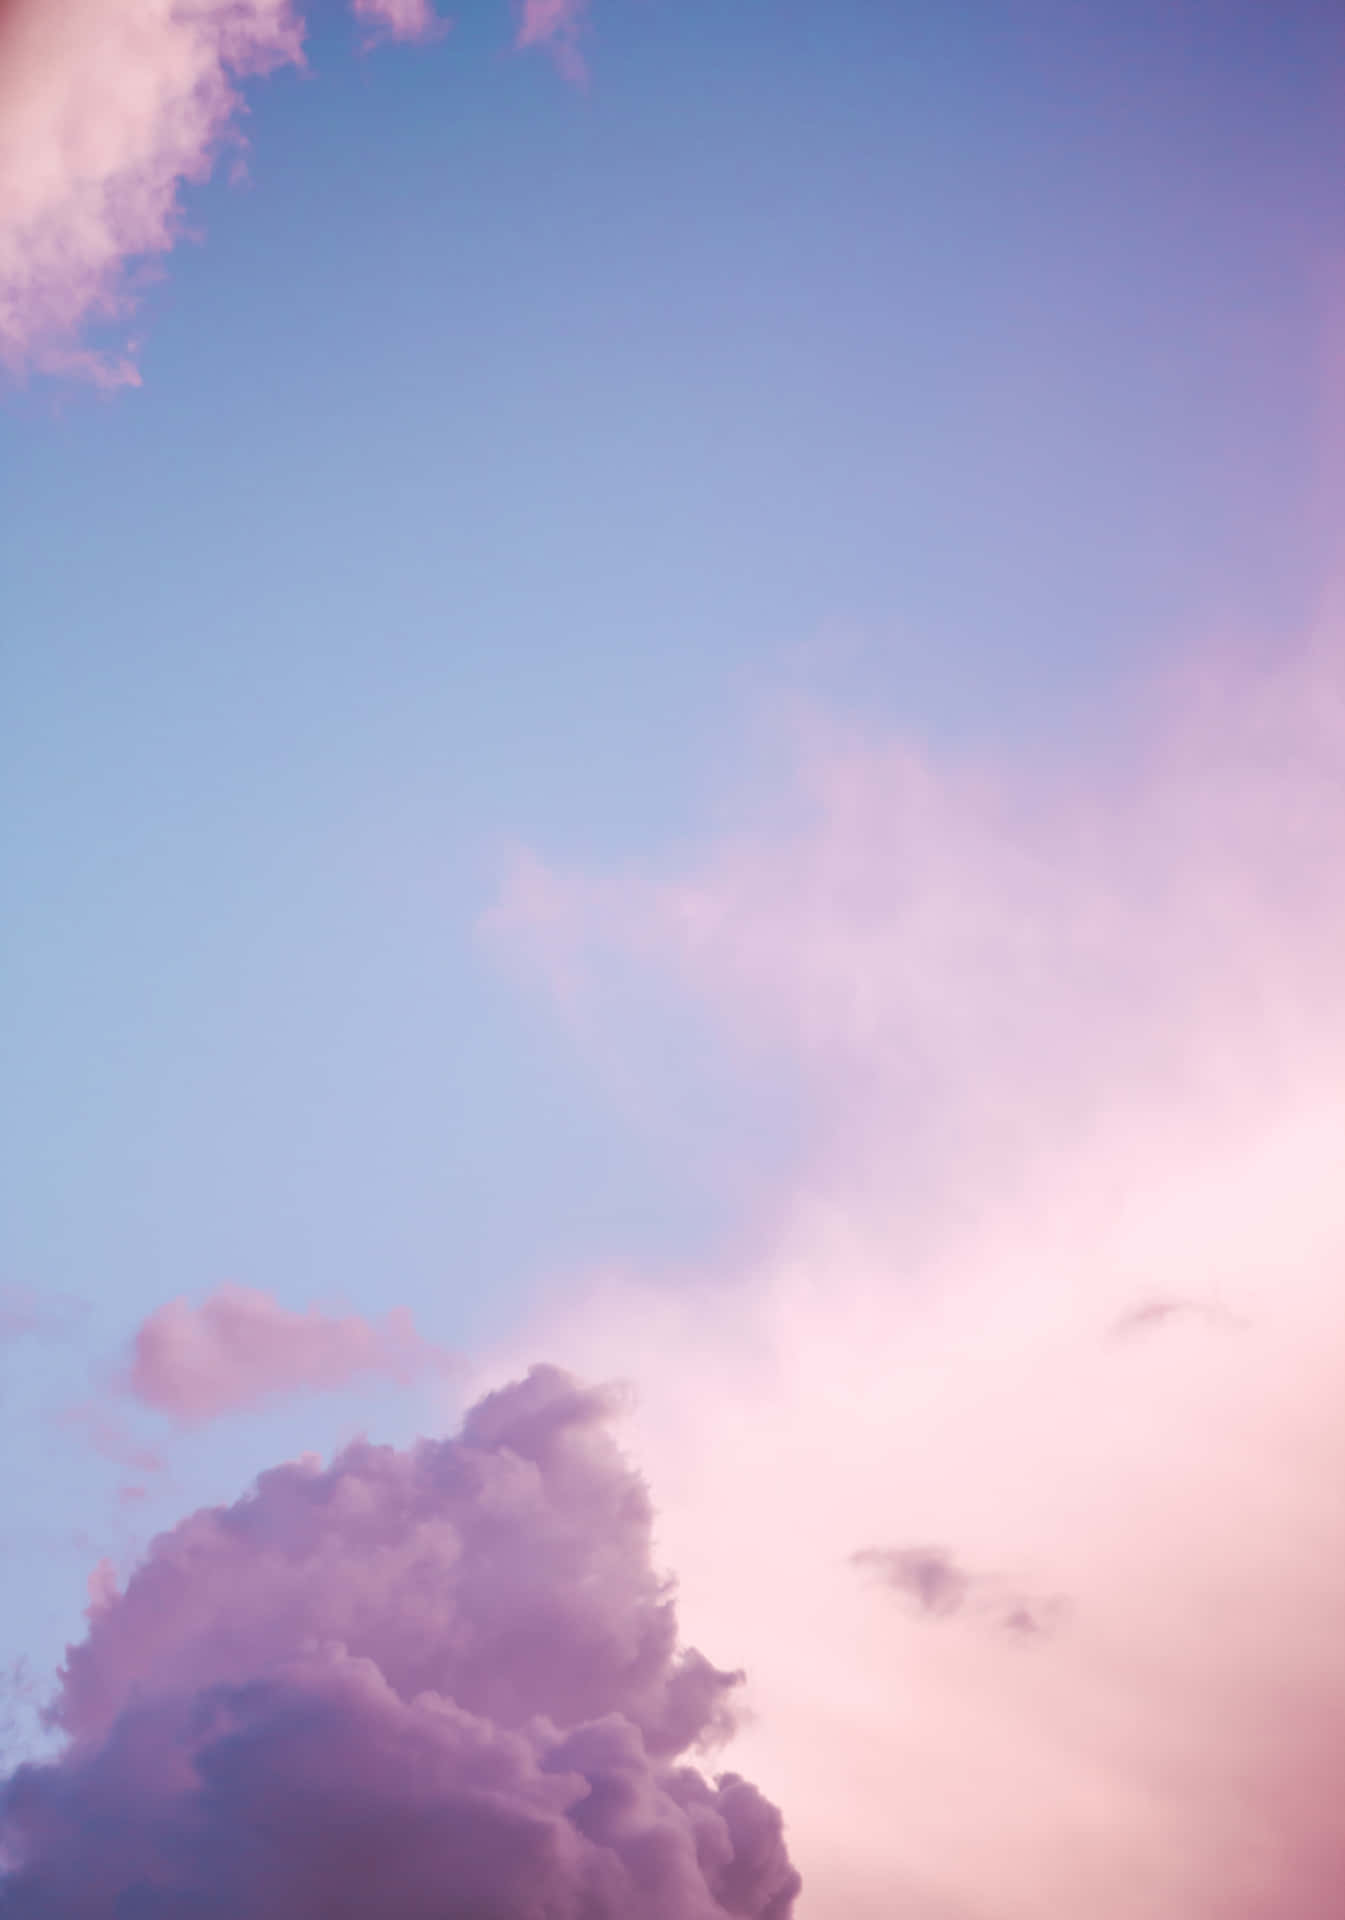 Clouds of pink and blue take over the sky Wallpaper